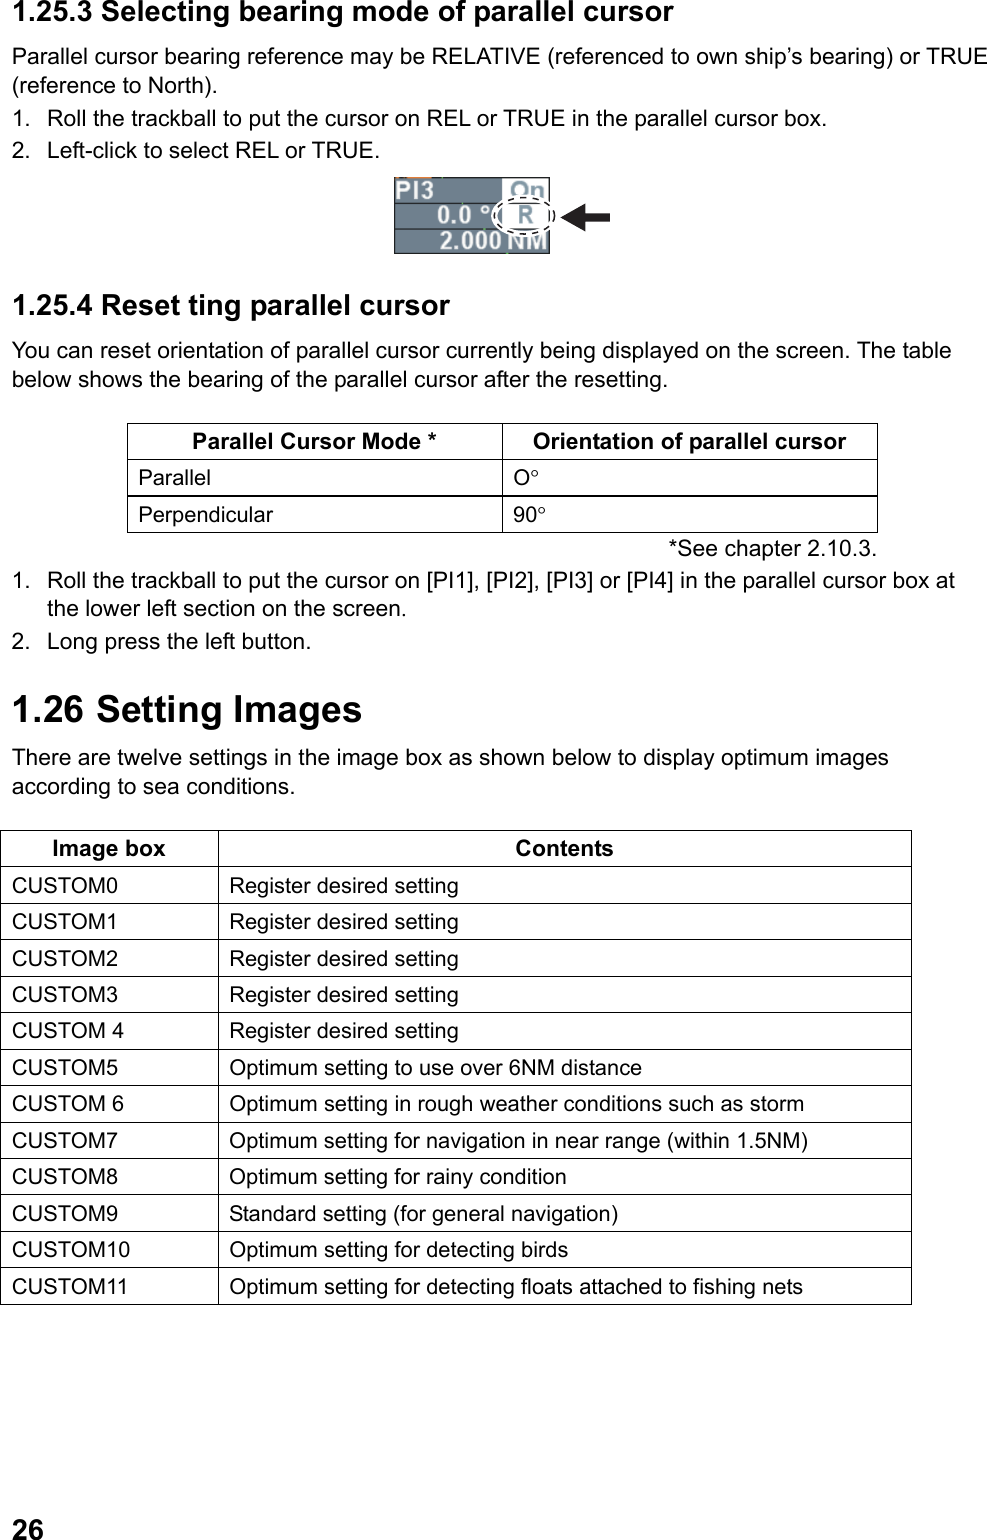  261.25.3 Selecting bearing mode of parallel cursor  Parallel cursor bearing reference may be RELATIVE (referenced to own ship’s bearing) or TRUE (reference to North).  1.  Roll the trackball to put the cursor on REL or TRUE in the parallel cursor box. 2.  Left-click to select REL or TRUE.  1.25.4 Reset ting parallel cursor You can reset orientation of parallel cursor currently being displayed on the screen. The table below shows the bearing of the parallel cursor after the resetting.  Parallel Cursor Mode *  Orientation of parallel cursor Parallel O° Perpendicular 90° *See chapter 2.10.3.                   1.  Roll the trackball to put the cursor on [PI1], [PI2], [PI3] or [PI4] in the parallel cursor box at the lower left section on the screen. 2.  Long press the left button. 1.26  Setting Images There are twelve settings in the image box as shown below to display optimum images according to sea conditions.  Image box  Contents CUSTOM0  Register desired setting CUSTOM1  Register desired setting CUSTOM2  Register desired setting CUSTOM3  Register desired setting CUSTOM 4  Register desired setting CUSTOM5  Optimum setting to use over 6NM distance CUSTOM 6  Optimum setting in rough weather conditions such as storm CUSTOM7  Optimum setting for navigation in near range (within 1.5NM) CUSTOM8  Optimum setting for rainy condition CUSTOM9  Standard setting (for general navigation) CUSTOM10  Optimum setting for detecting birds CUSTOM11  Optimum setting for detecting floats attached to fishing nets  